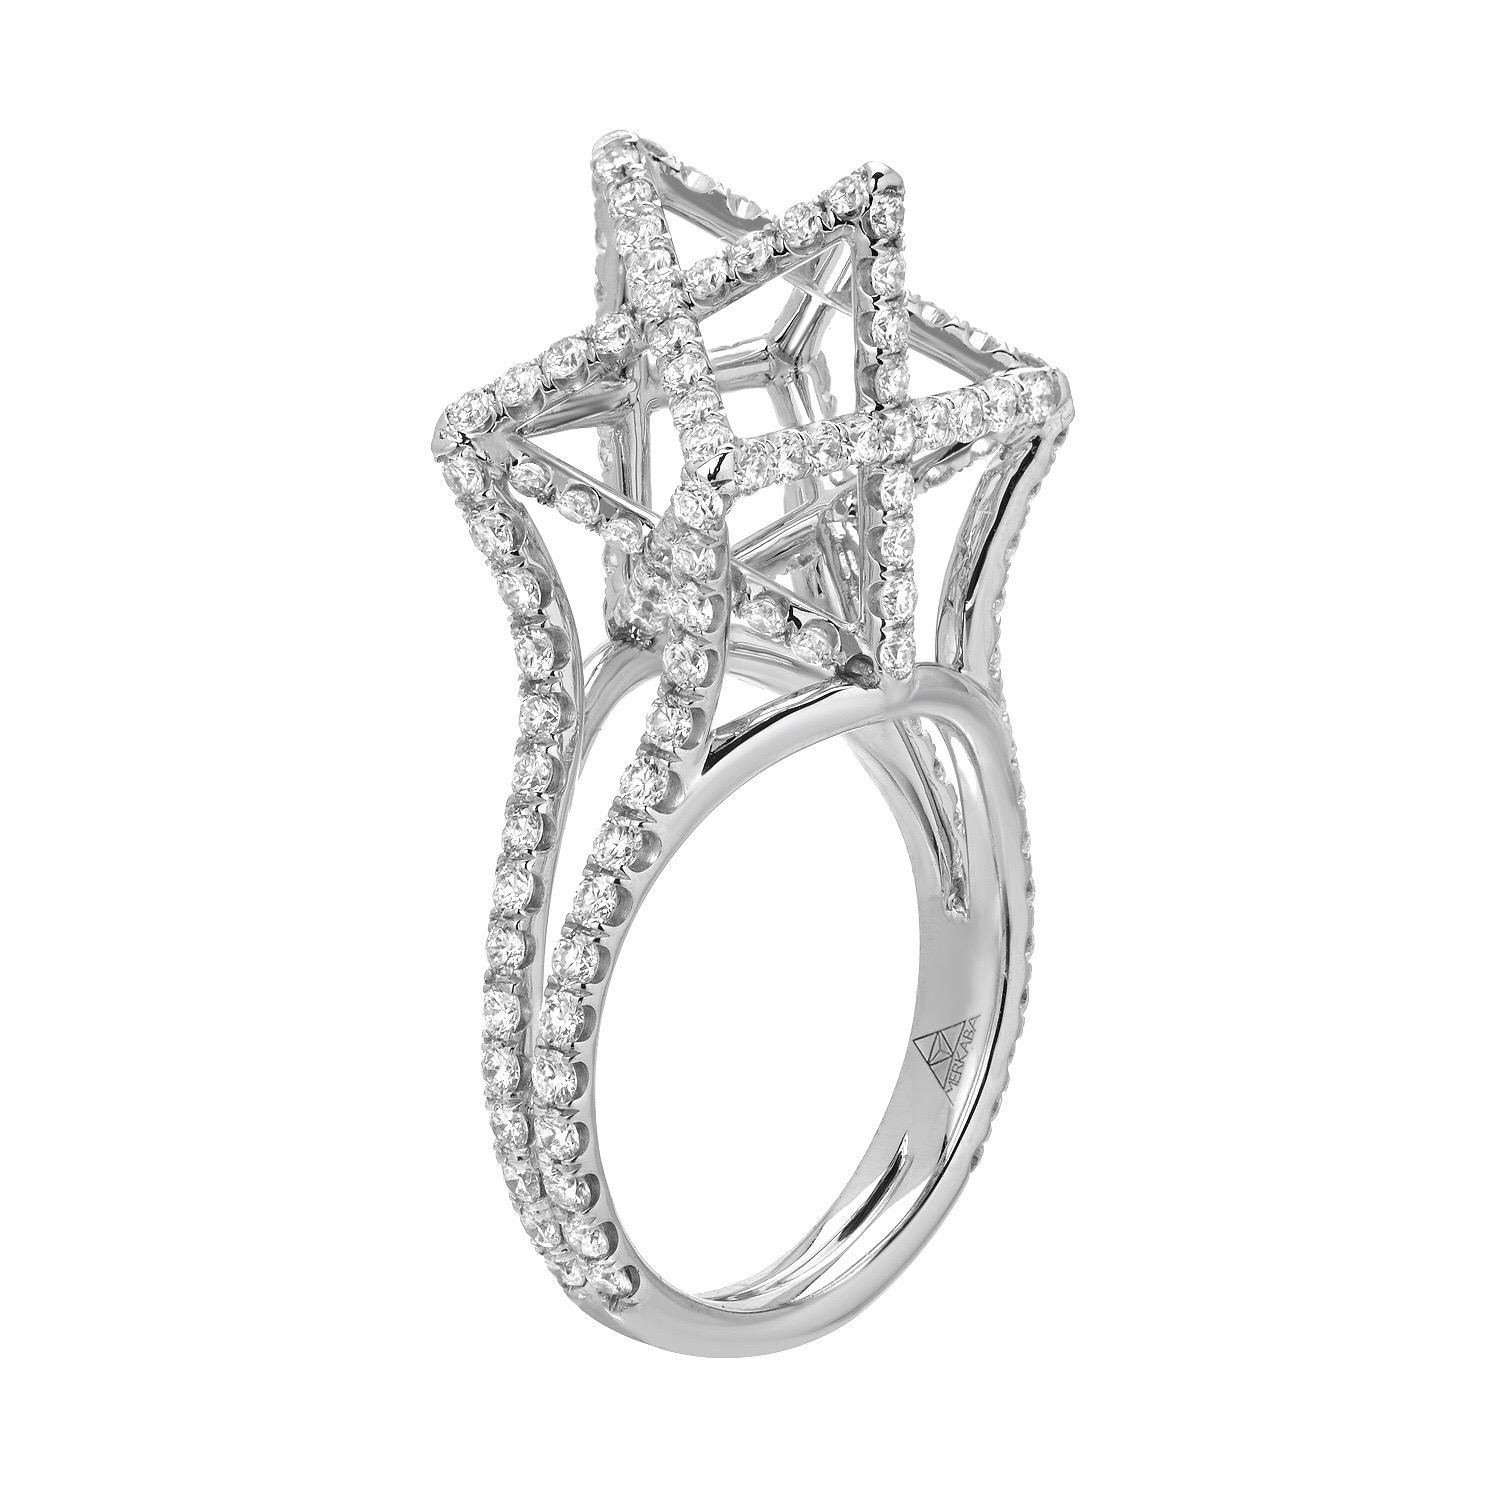 Architectural Merkaba Star platinum diamond ring, featuring a total of approximately 2.02 carats of round brilliant diamonds, F-G color and VVS2-VS1 clarity. This dramatic ring design, extends upward from the hand, 0.53 inches, a stunning